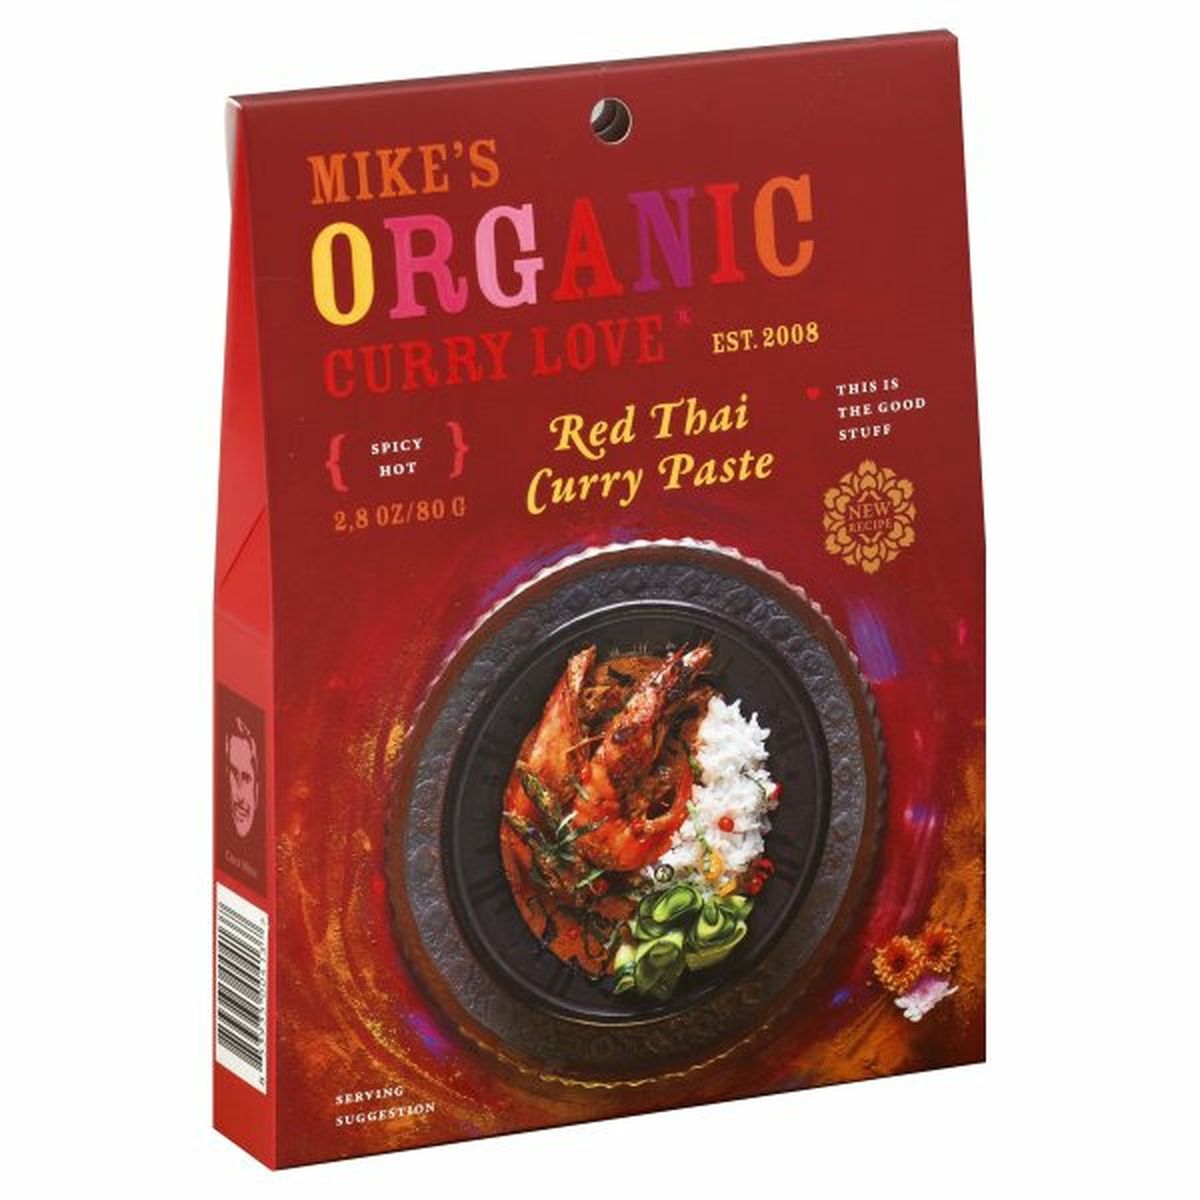 Calories in Mikes Organic Curry Love Curry Paste, Red Thai, Spicy Hot